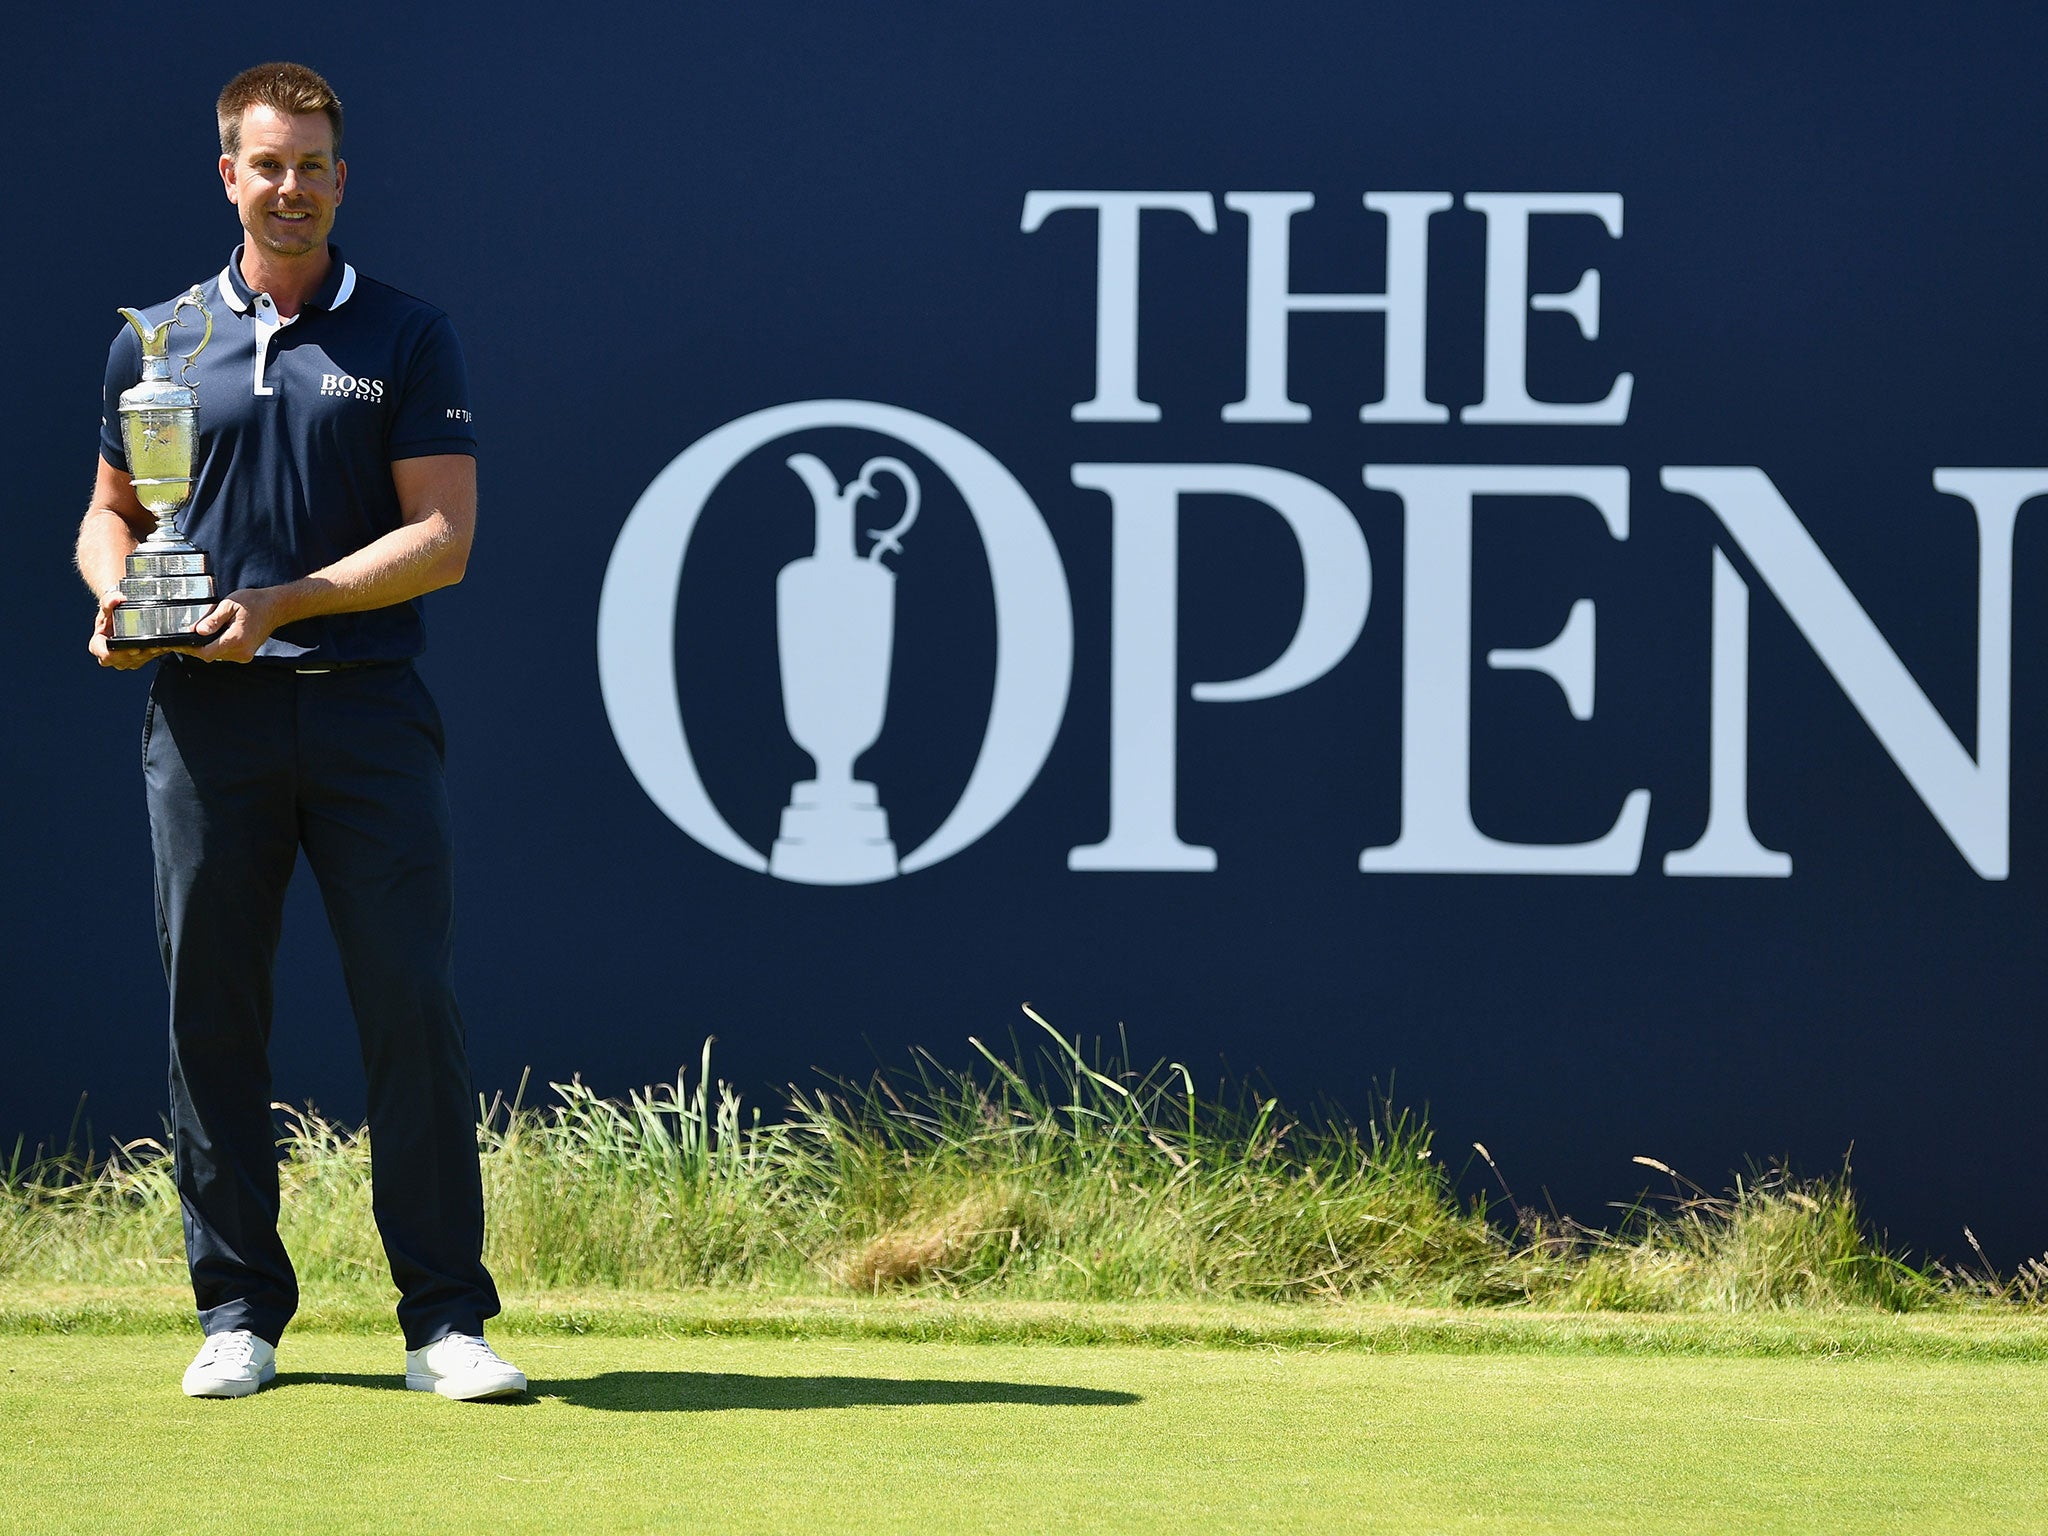 Henrik Stenson is looking to defend his title